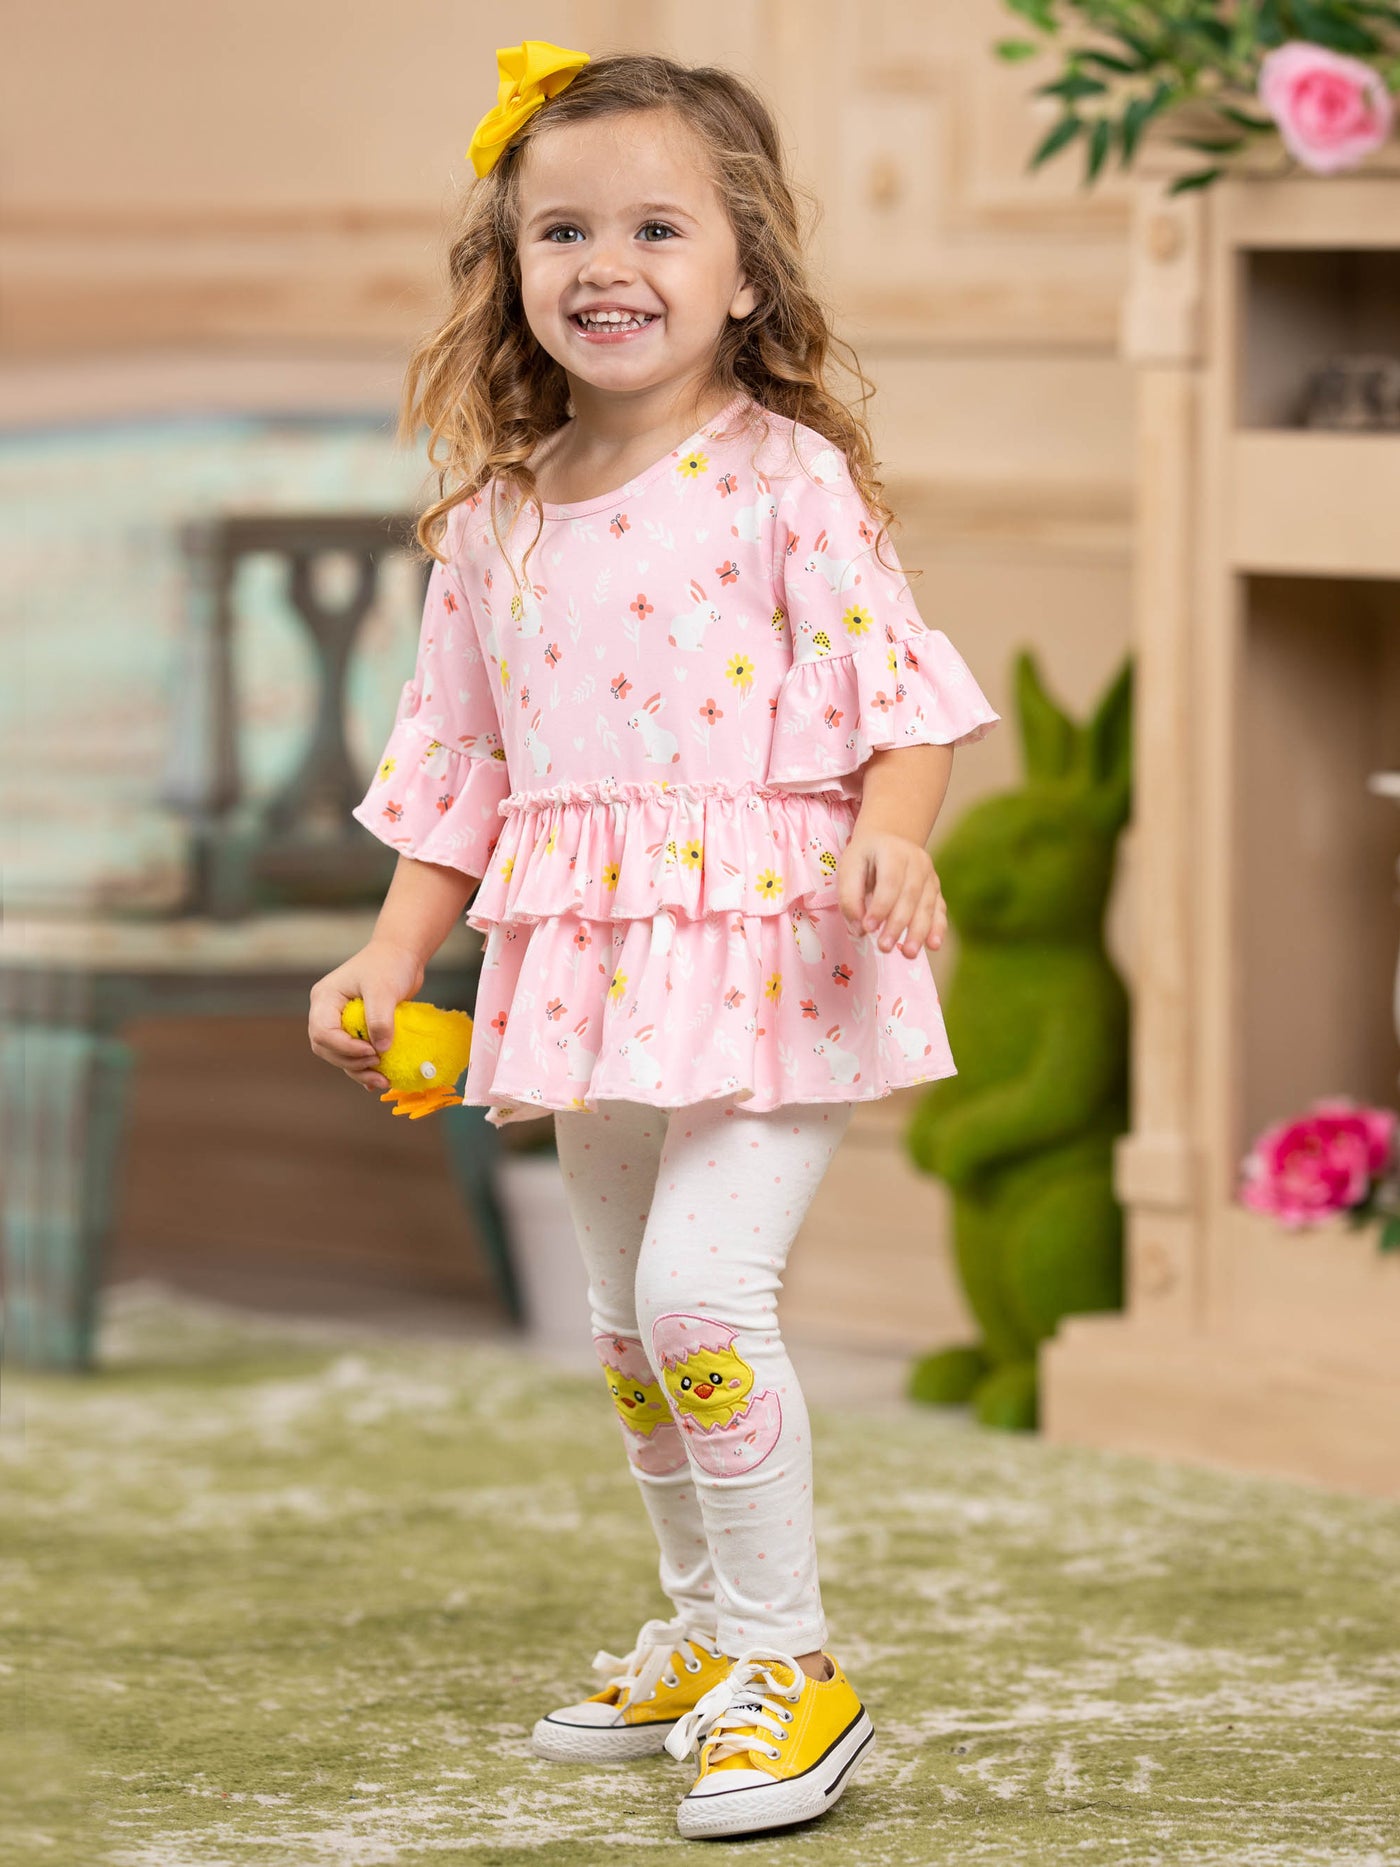 Kids Easter Outfits | Girls Tiered Ruffle Top & Patched Legging Set